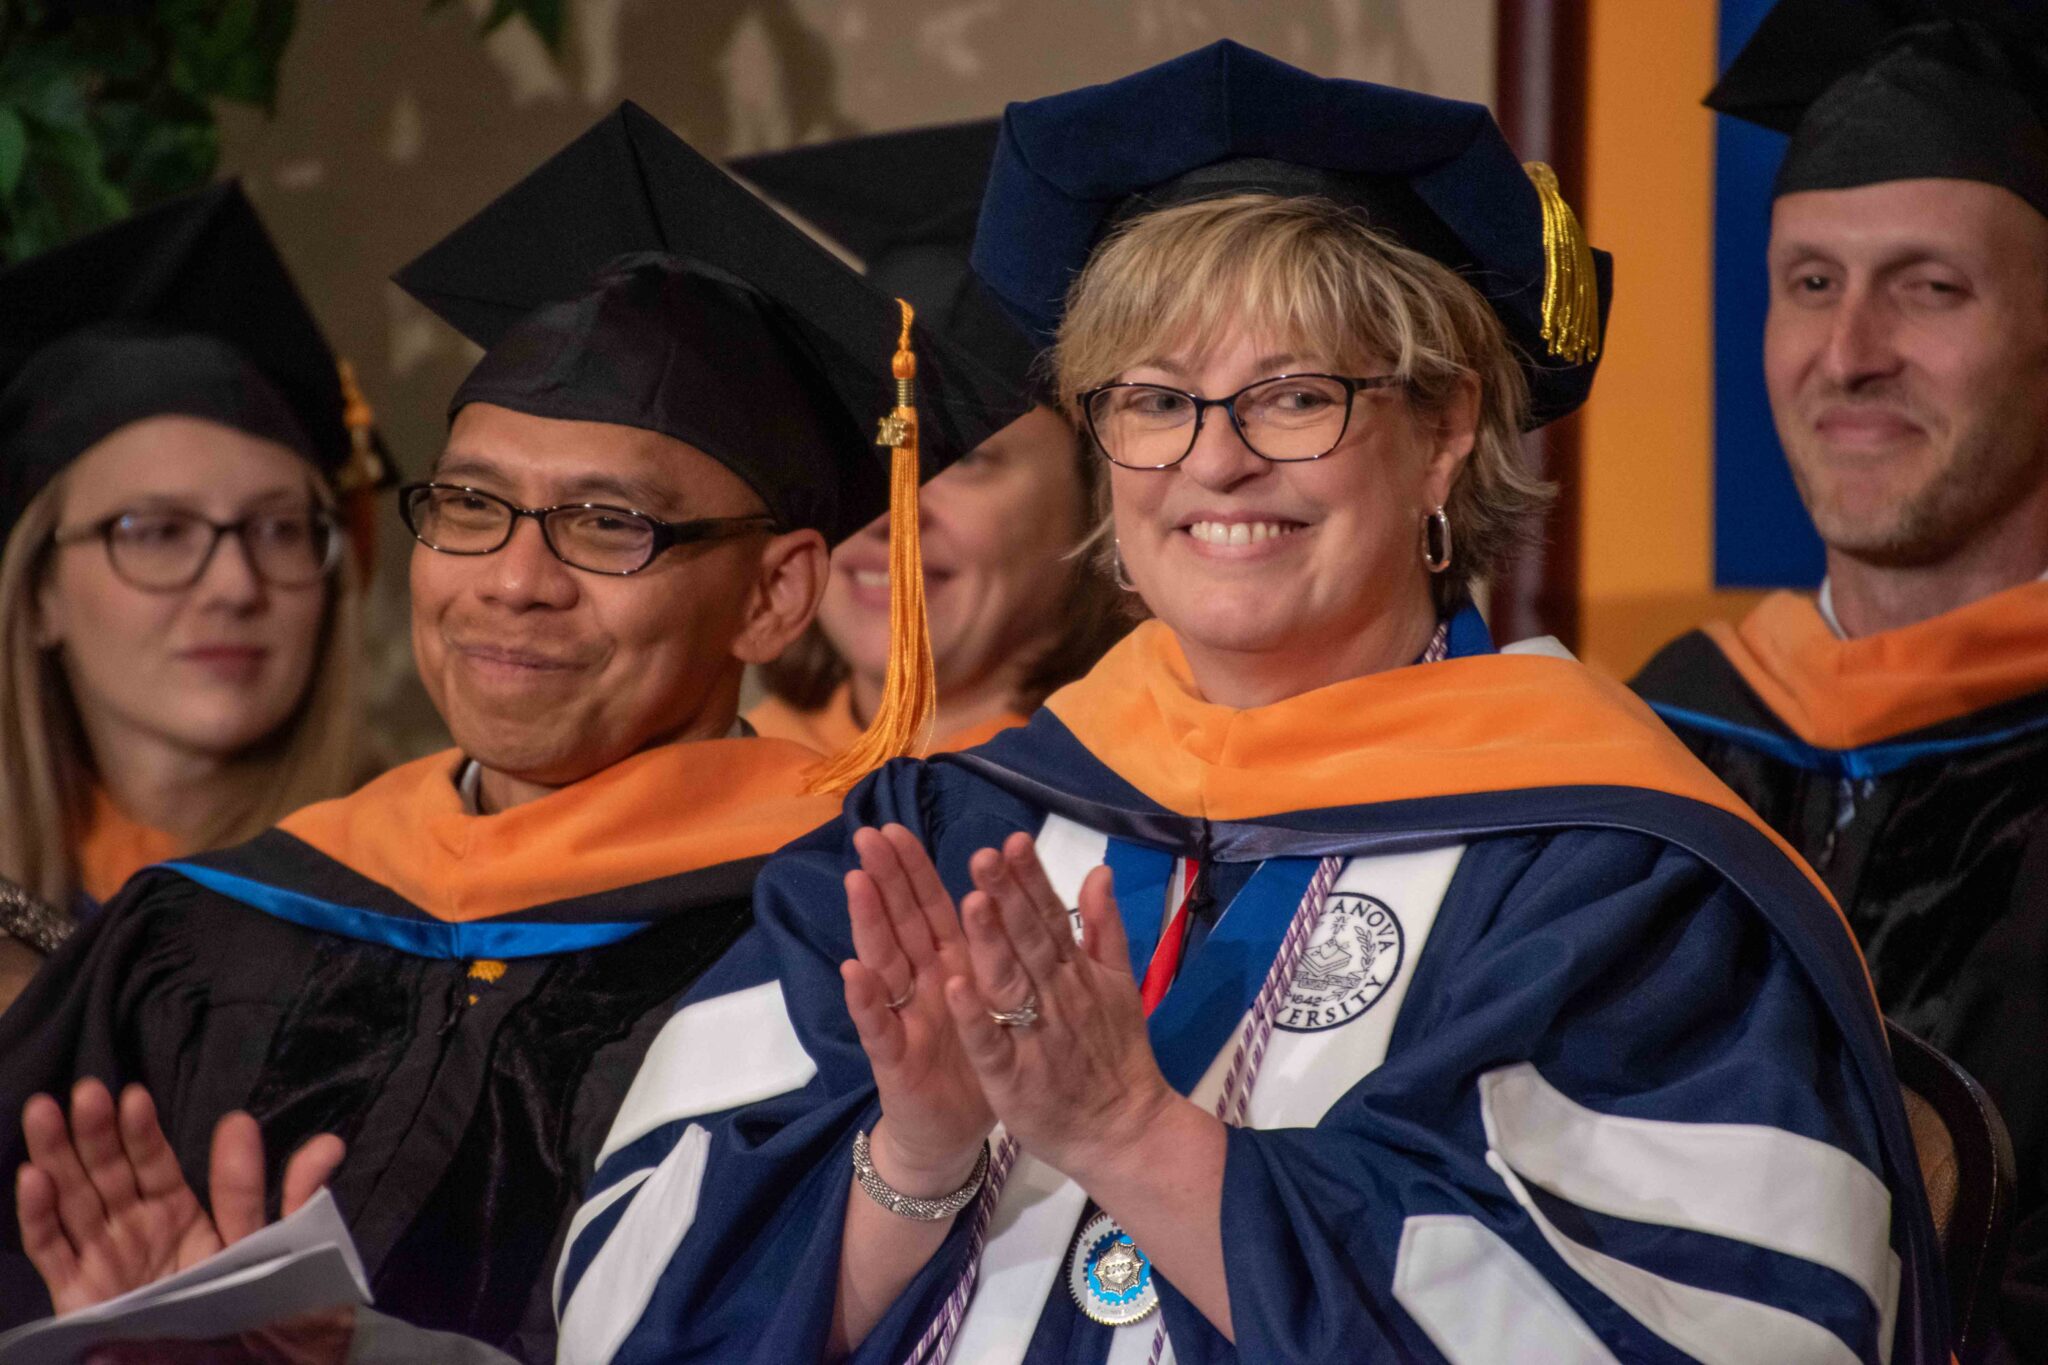 Dr. Jay Tumulak and Dr. Lisa Thiemann at the 2023 Doctor of Nursing Practice in Anesthesiology graduation ceremony